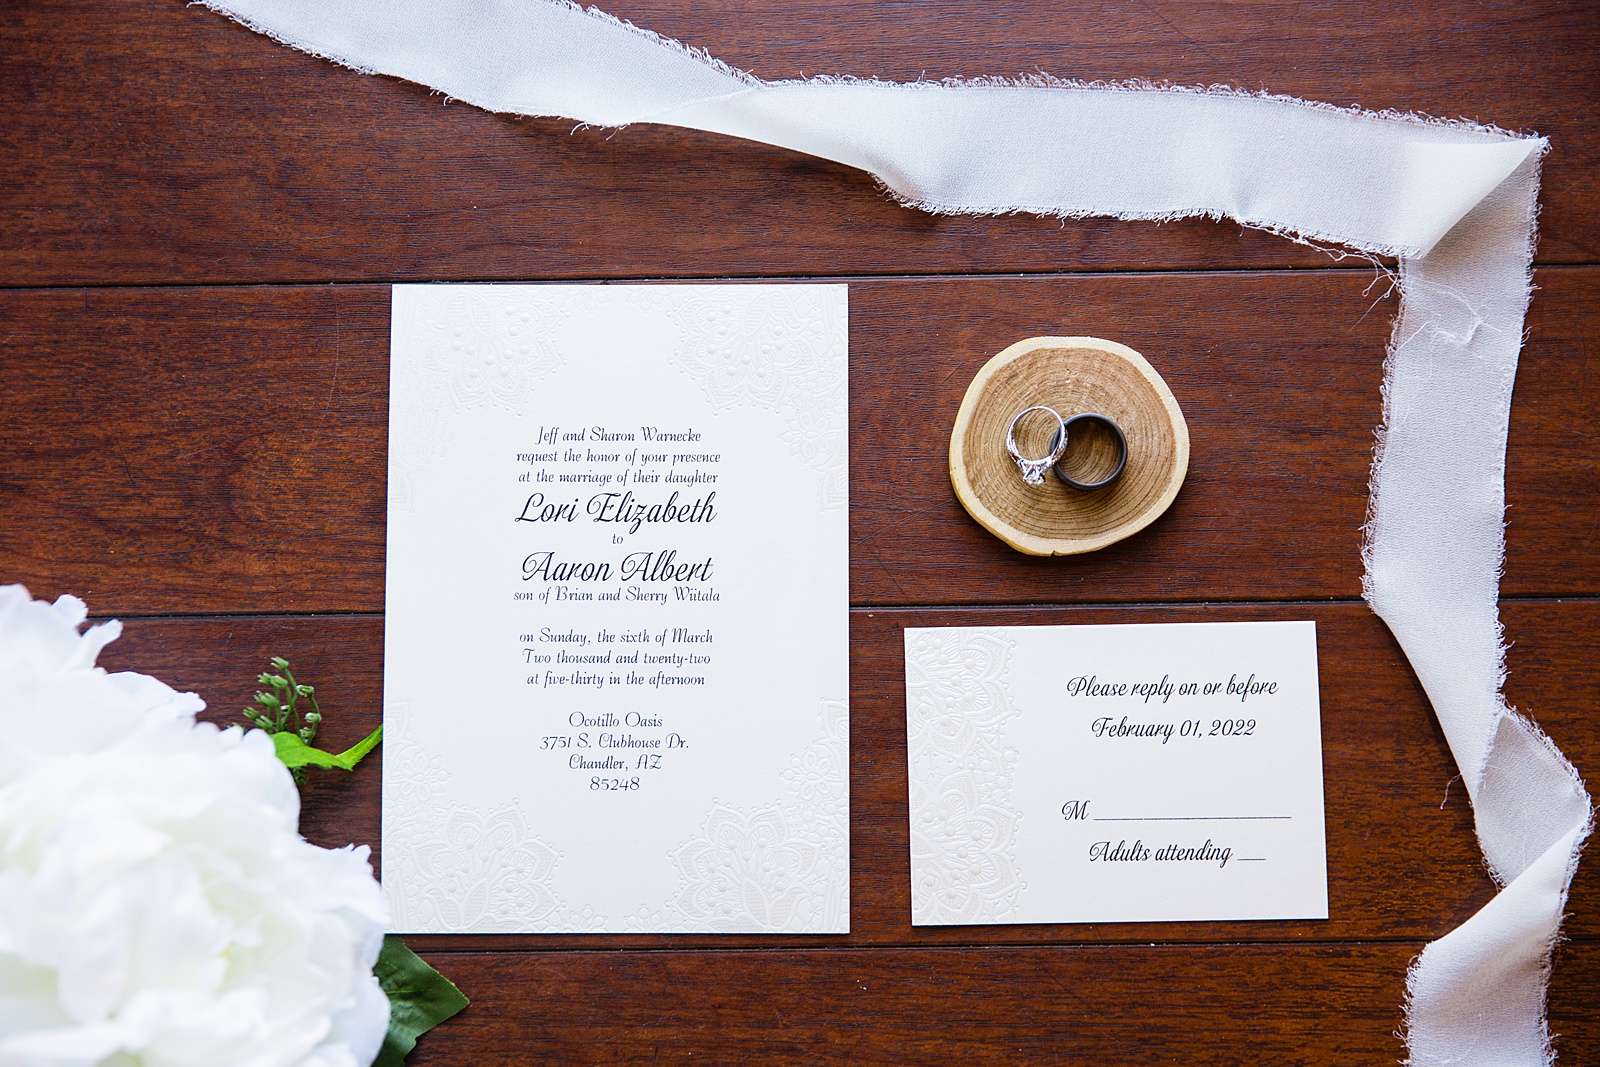 Bride and grooms wedding rings on top of classic wedding invitations by PMA Photography.